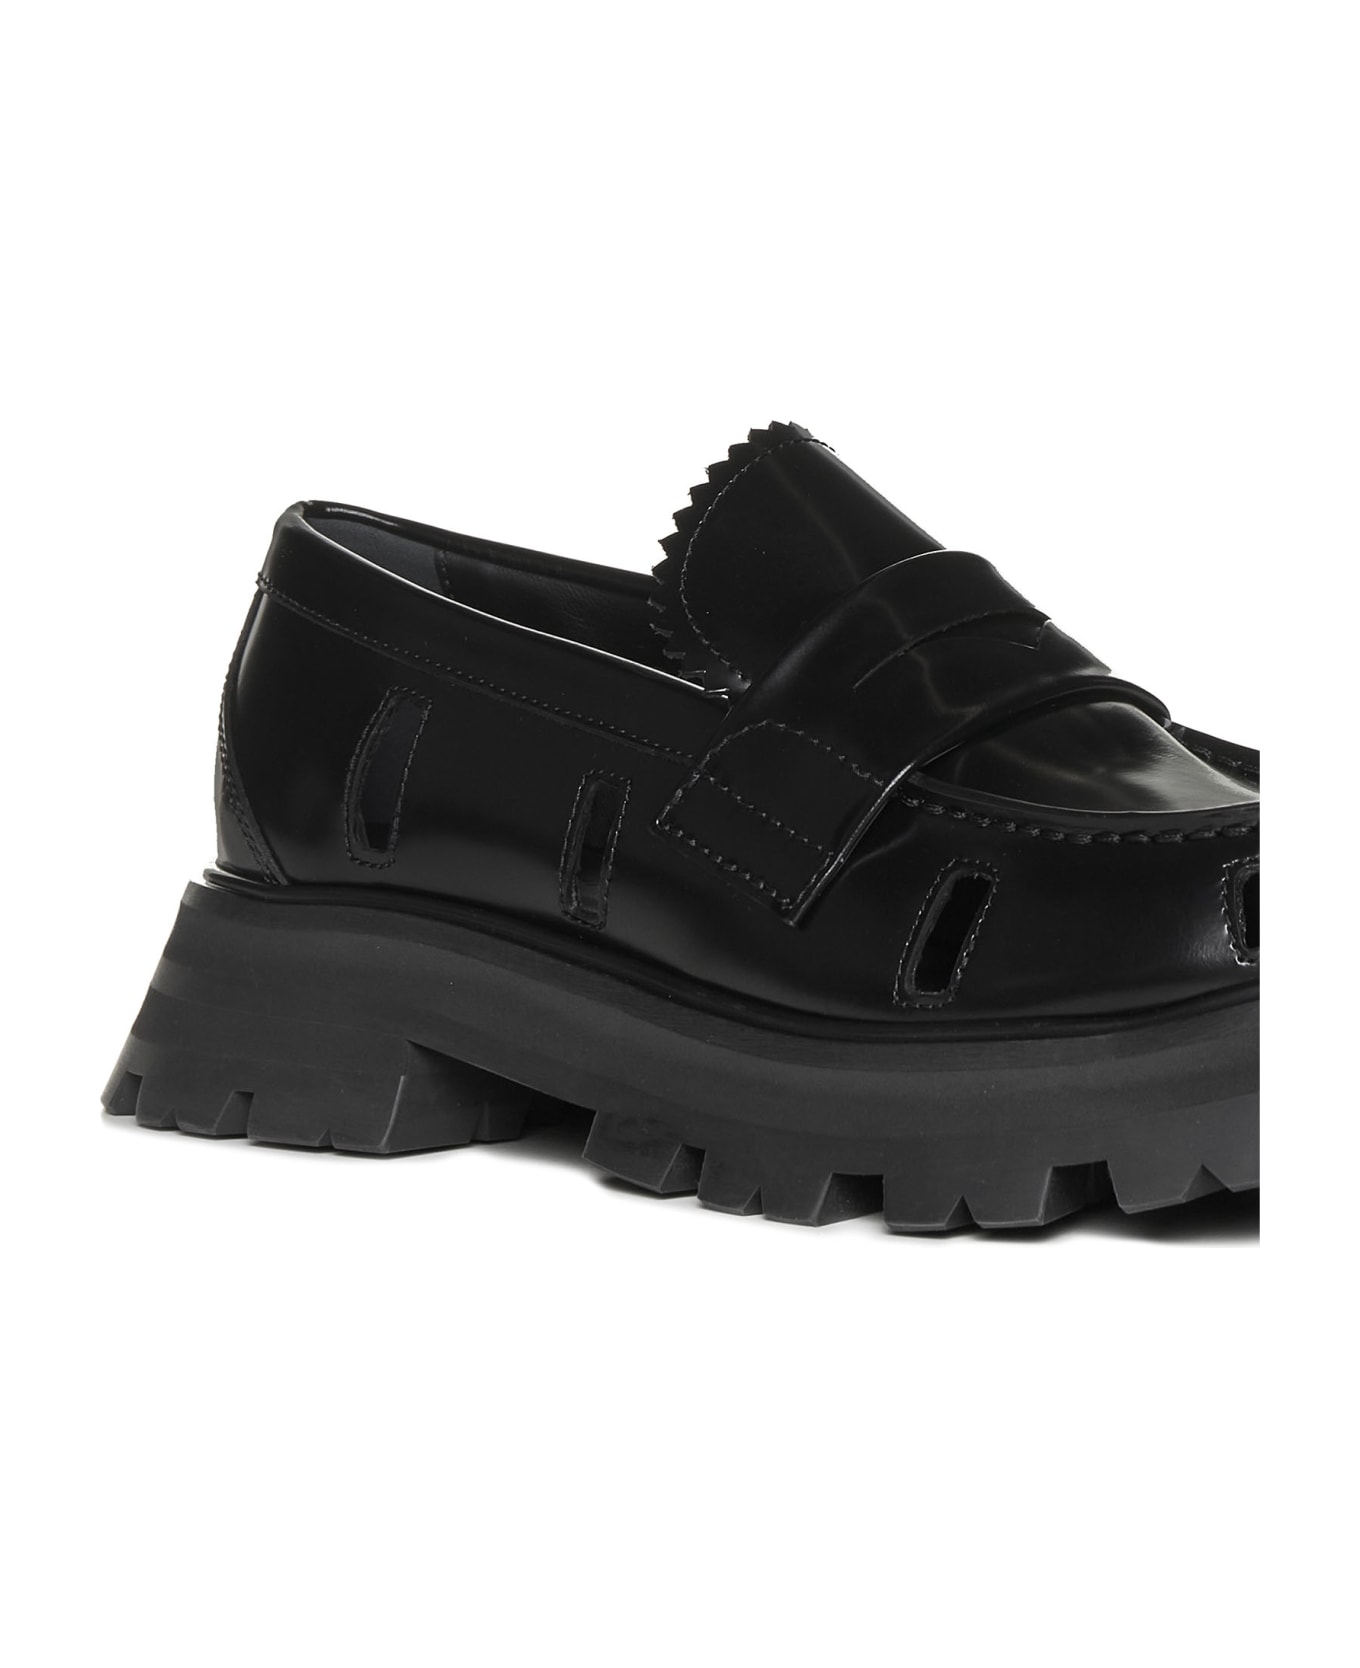 Alexander McQueen Cut-out Loafers - Black フラットシューズ